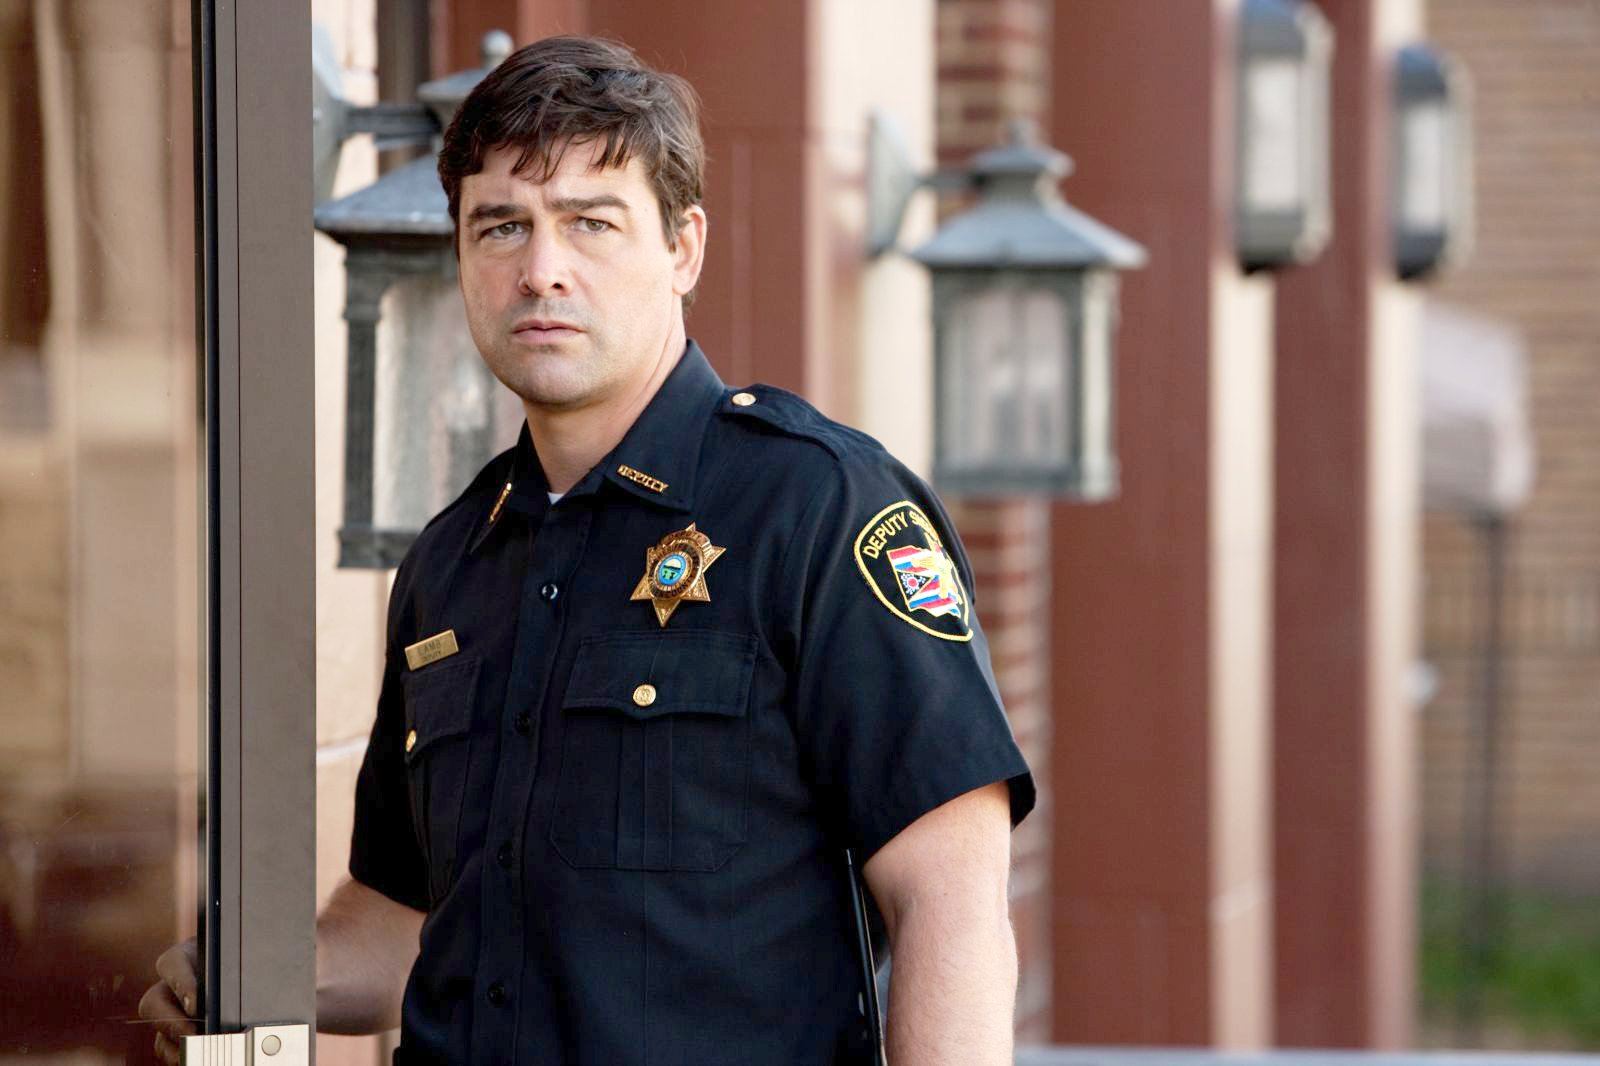 Kyle Chandler stars as Jackson Lamb in Paramount Pictures' Super 8 (2011). Photo credit by Francois Duhamel.